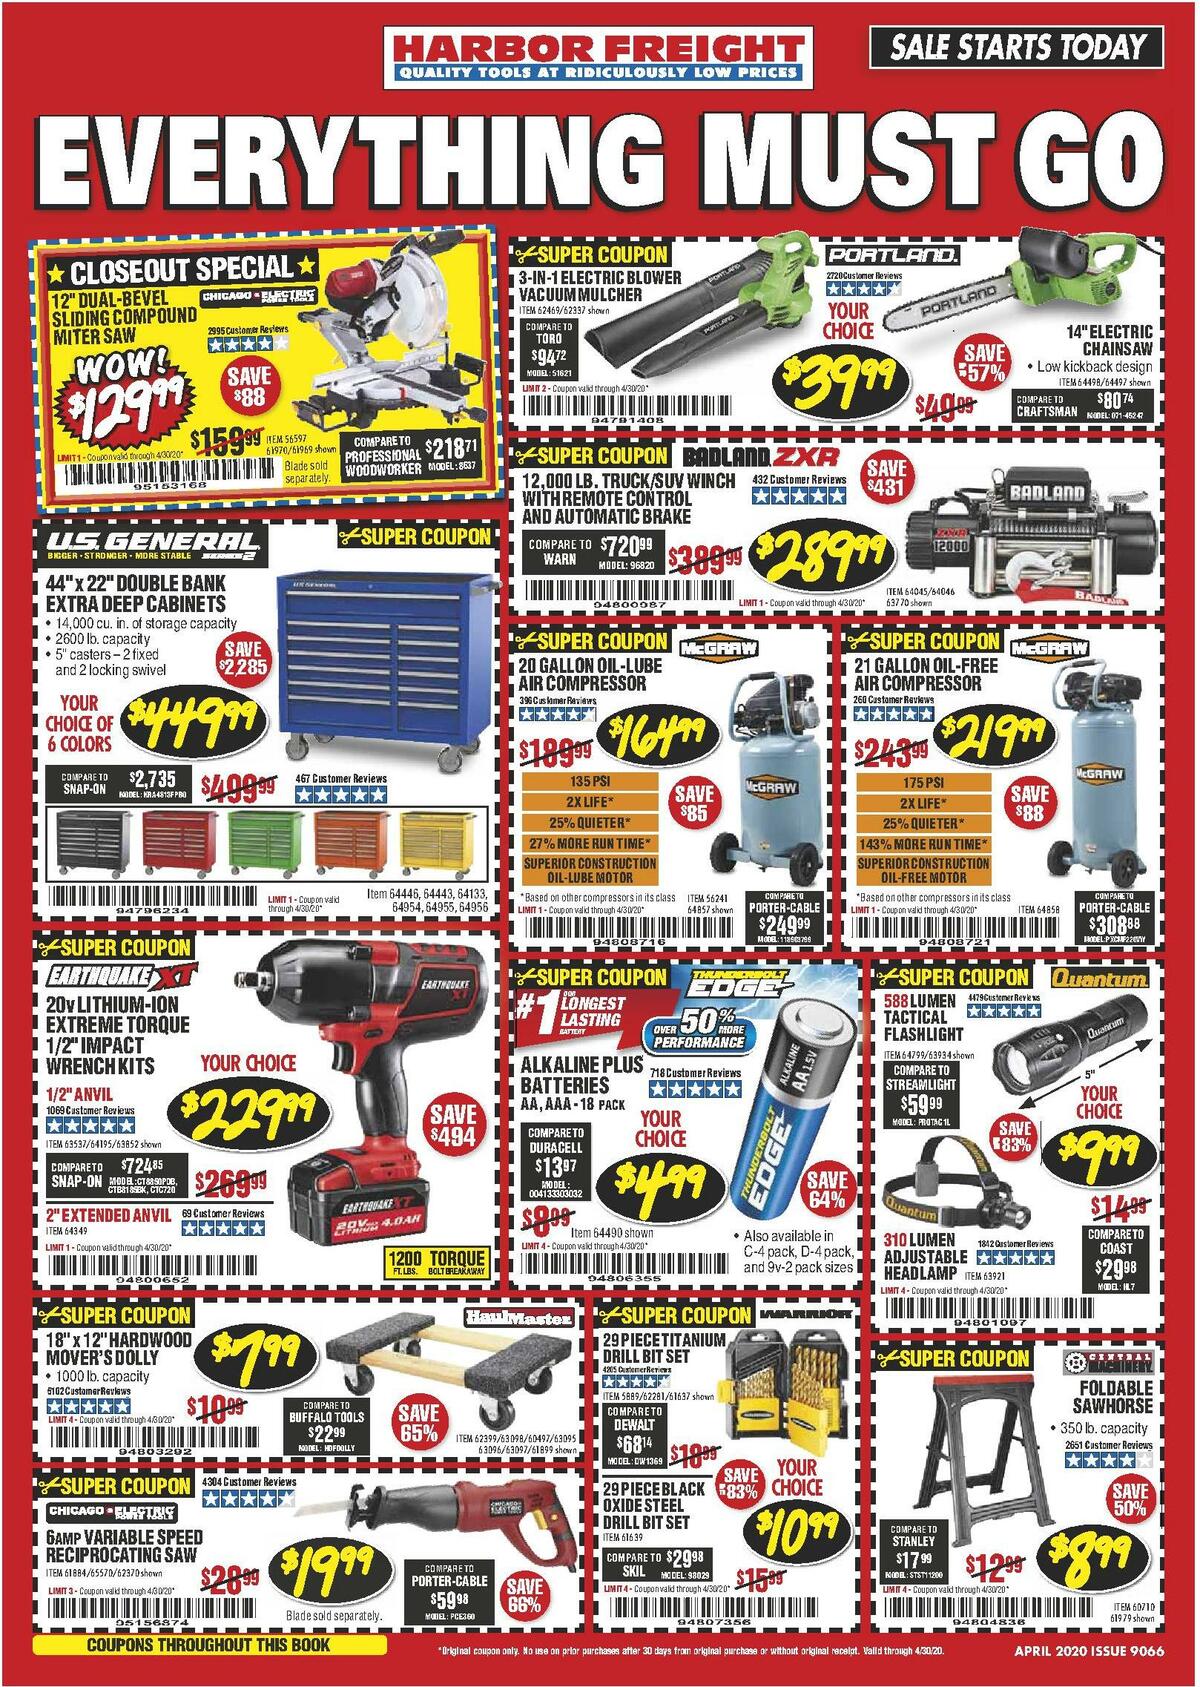 Harbor Freight Tools Best Offers & Special Buys from April 1